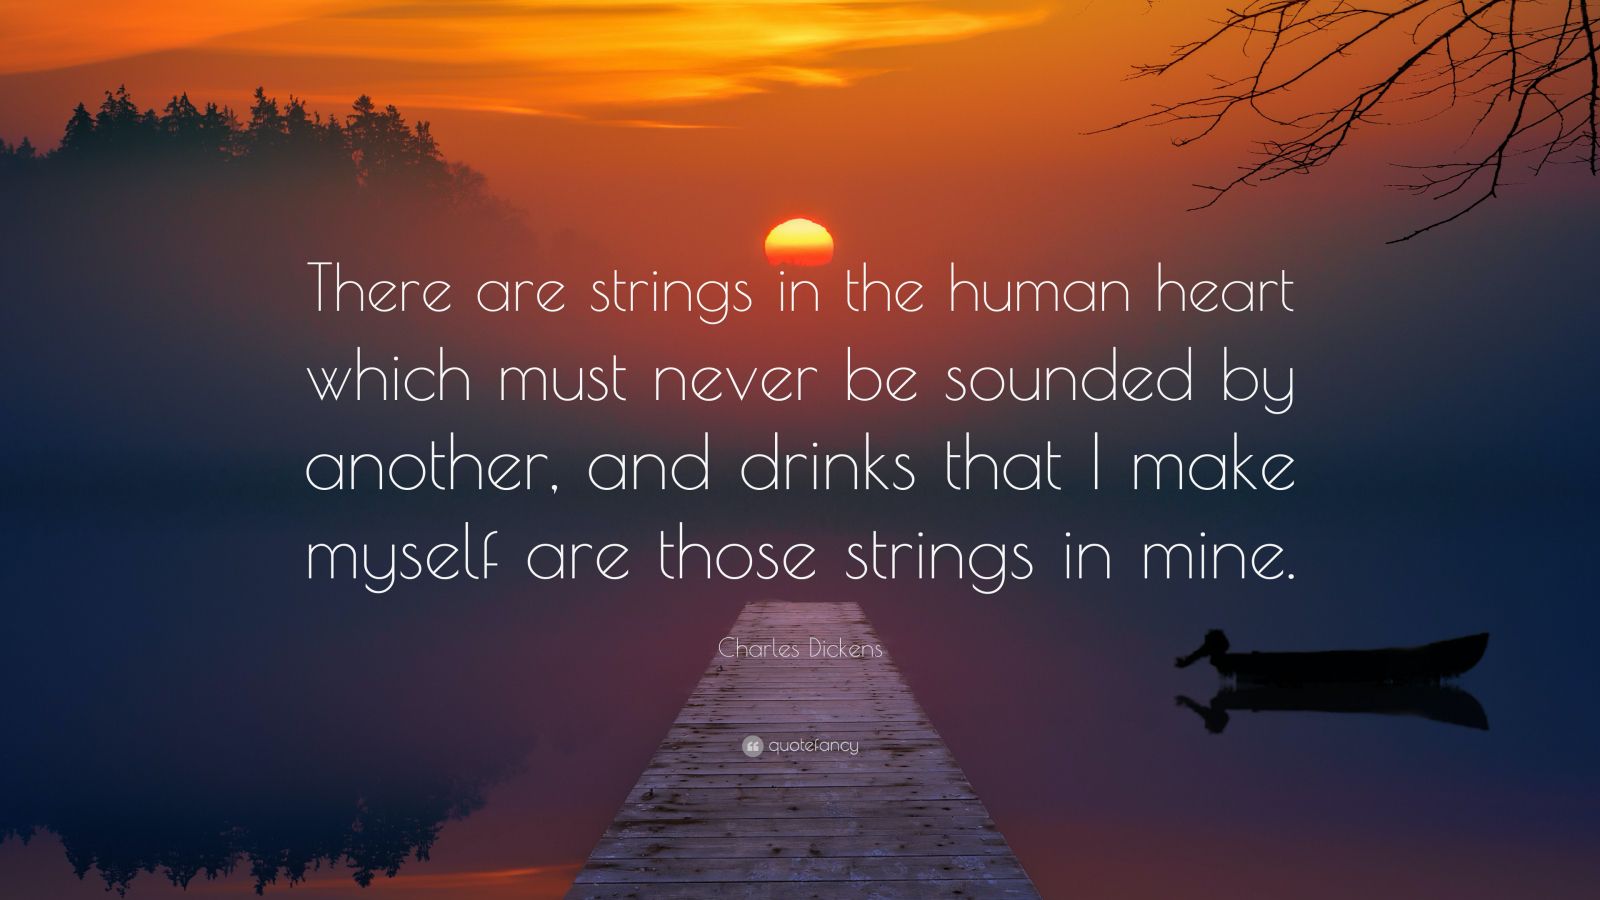 Charles Dickens Quote: “There are strings in the human heart which must ...